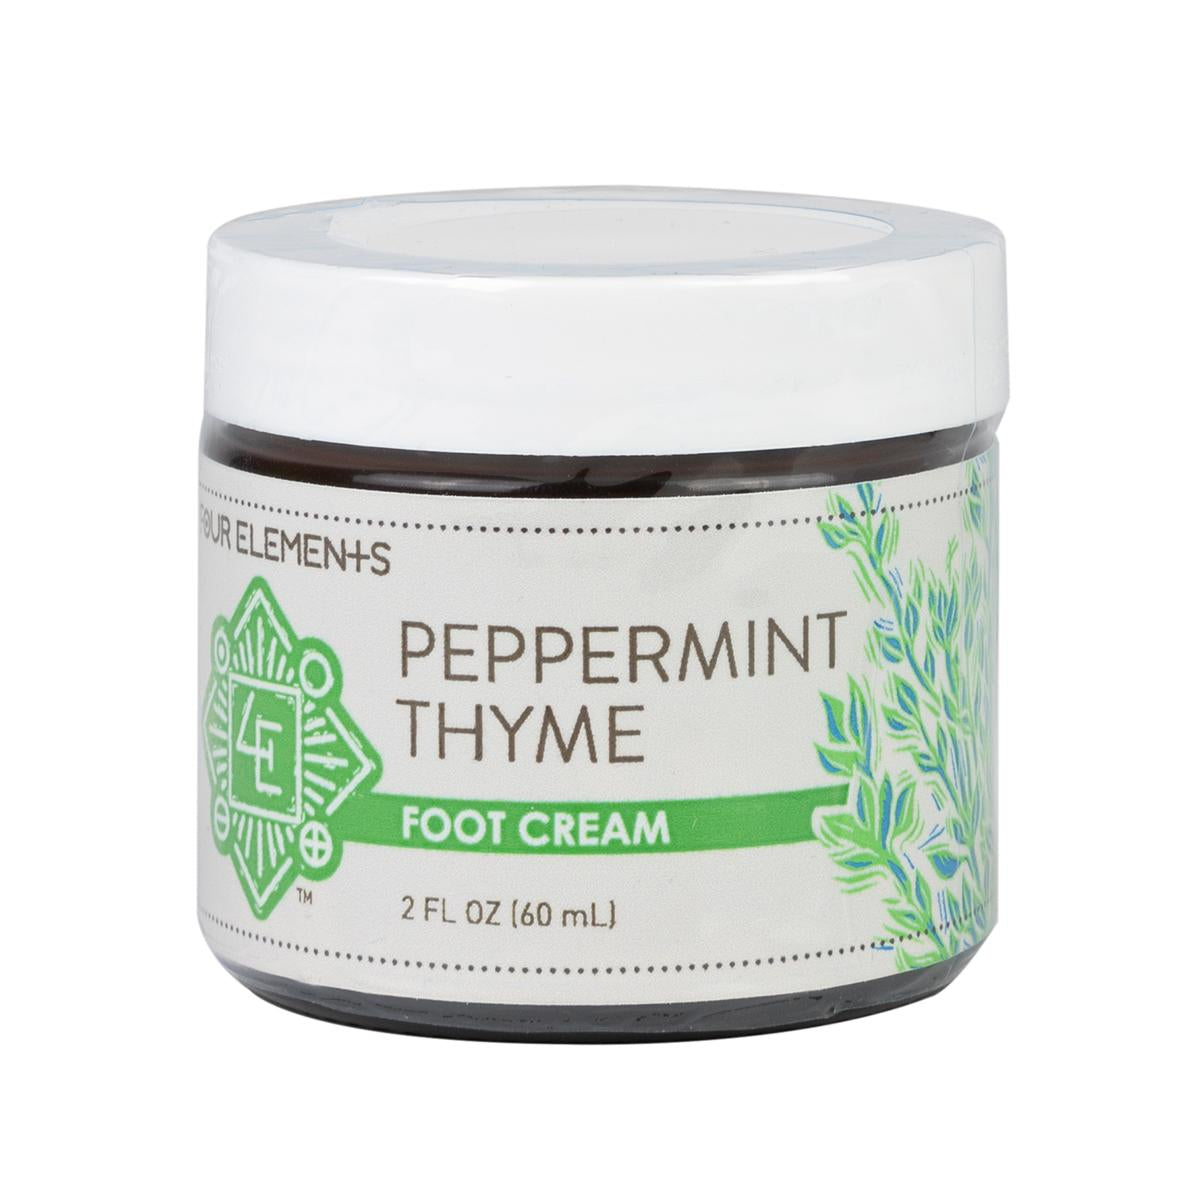 Primary image of Peppermint Thyme Foot Cream